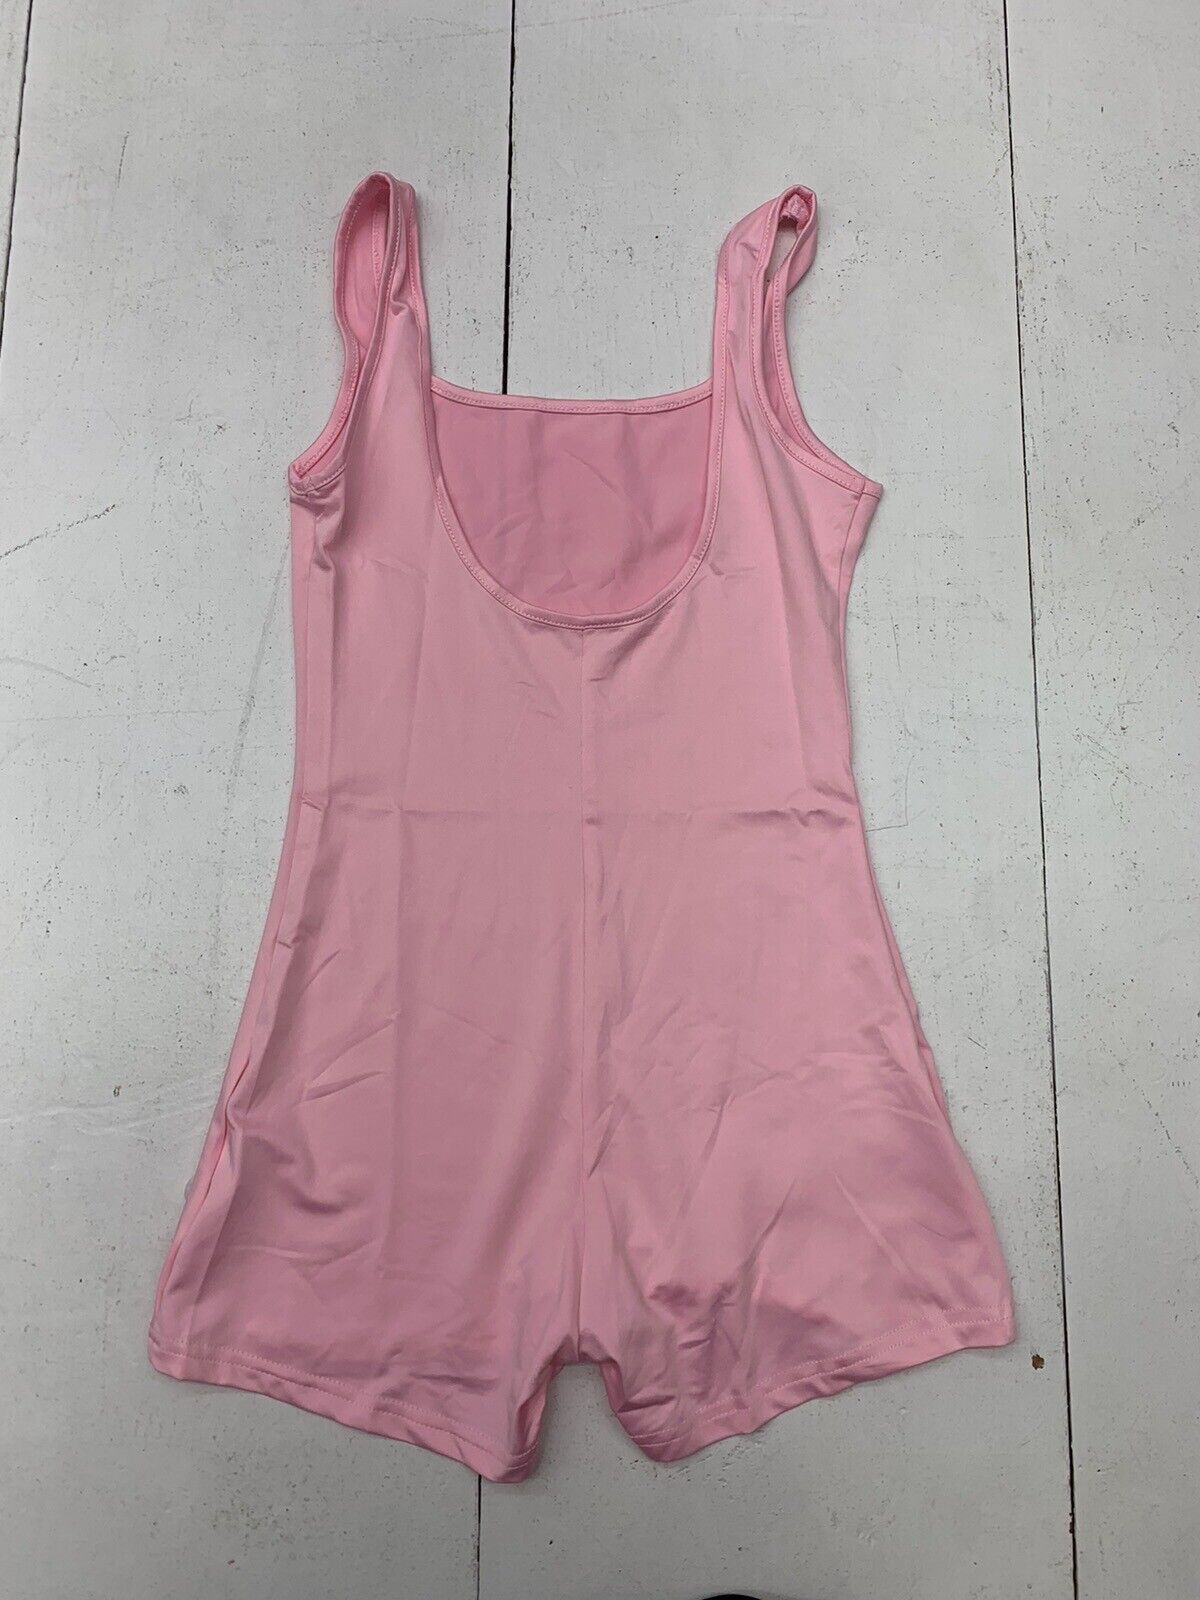 Womens Pink Tank Body Suit Size Small